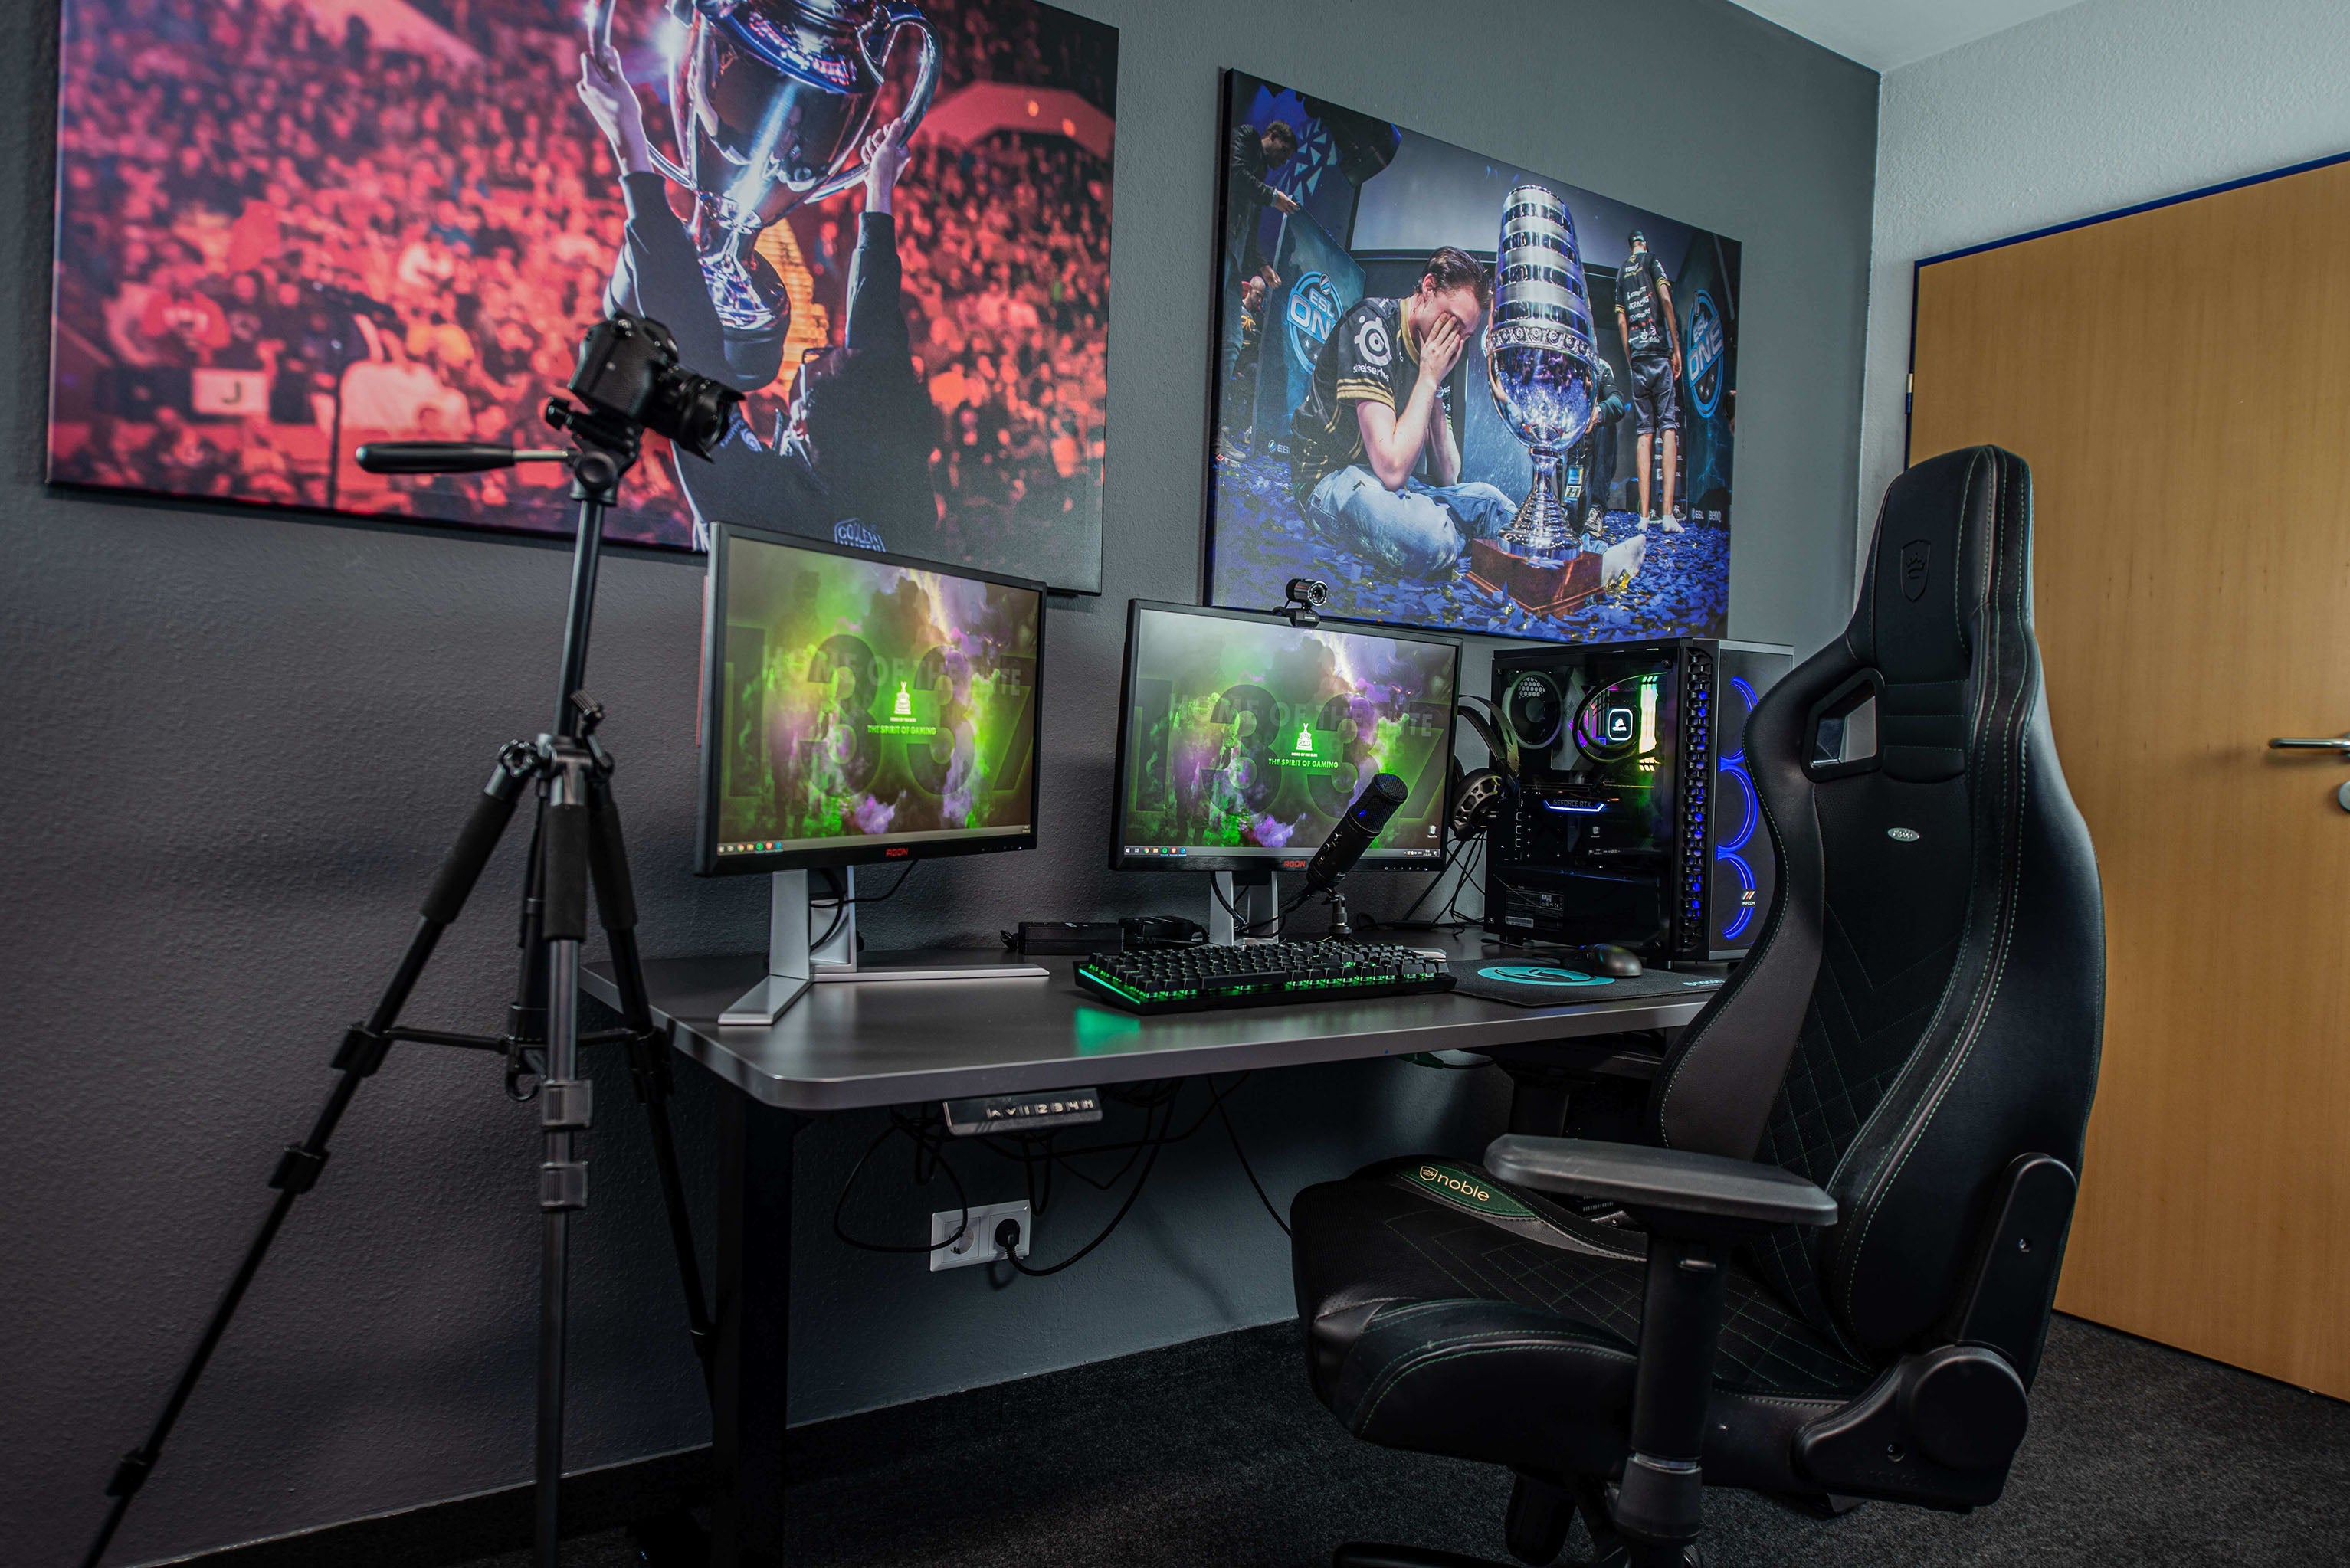 How To Make A Gaming Room? Useful Gaming Setup Ideas